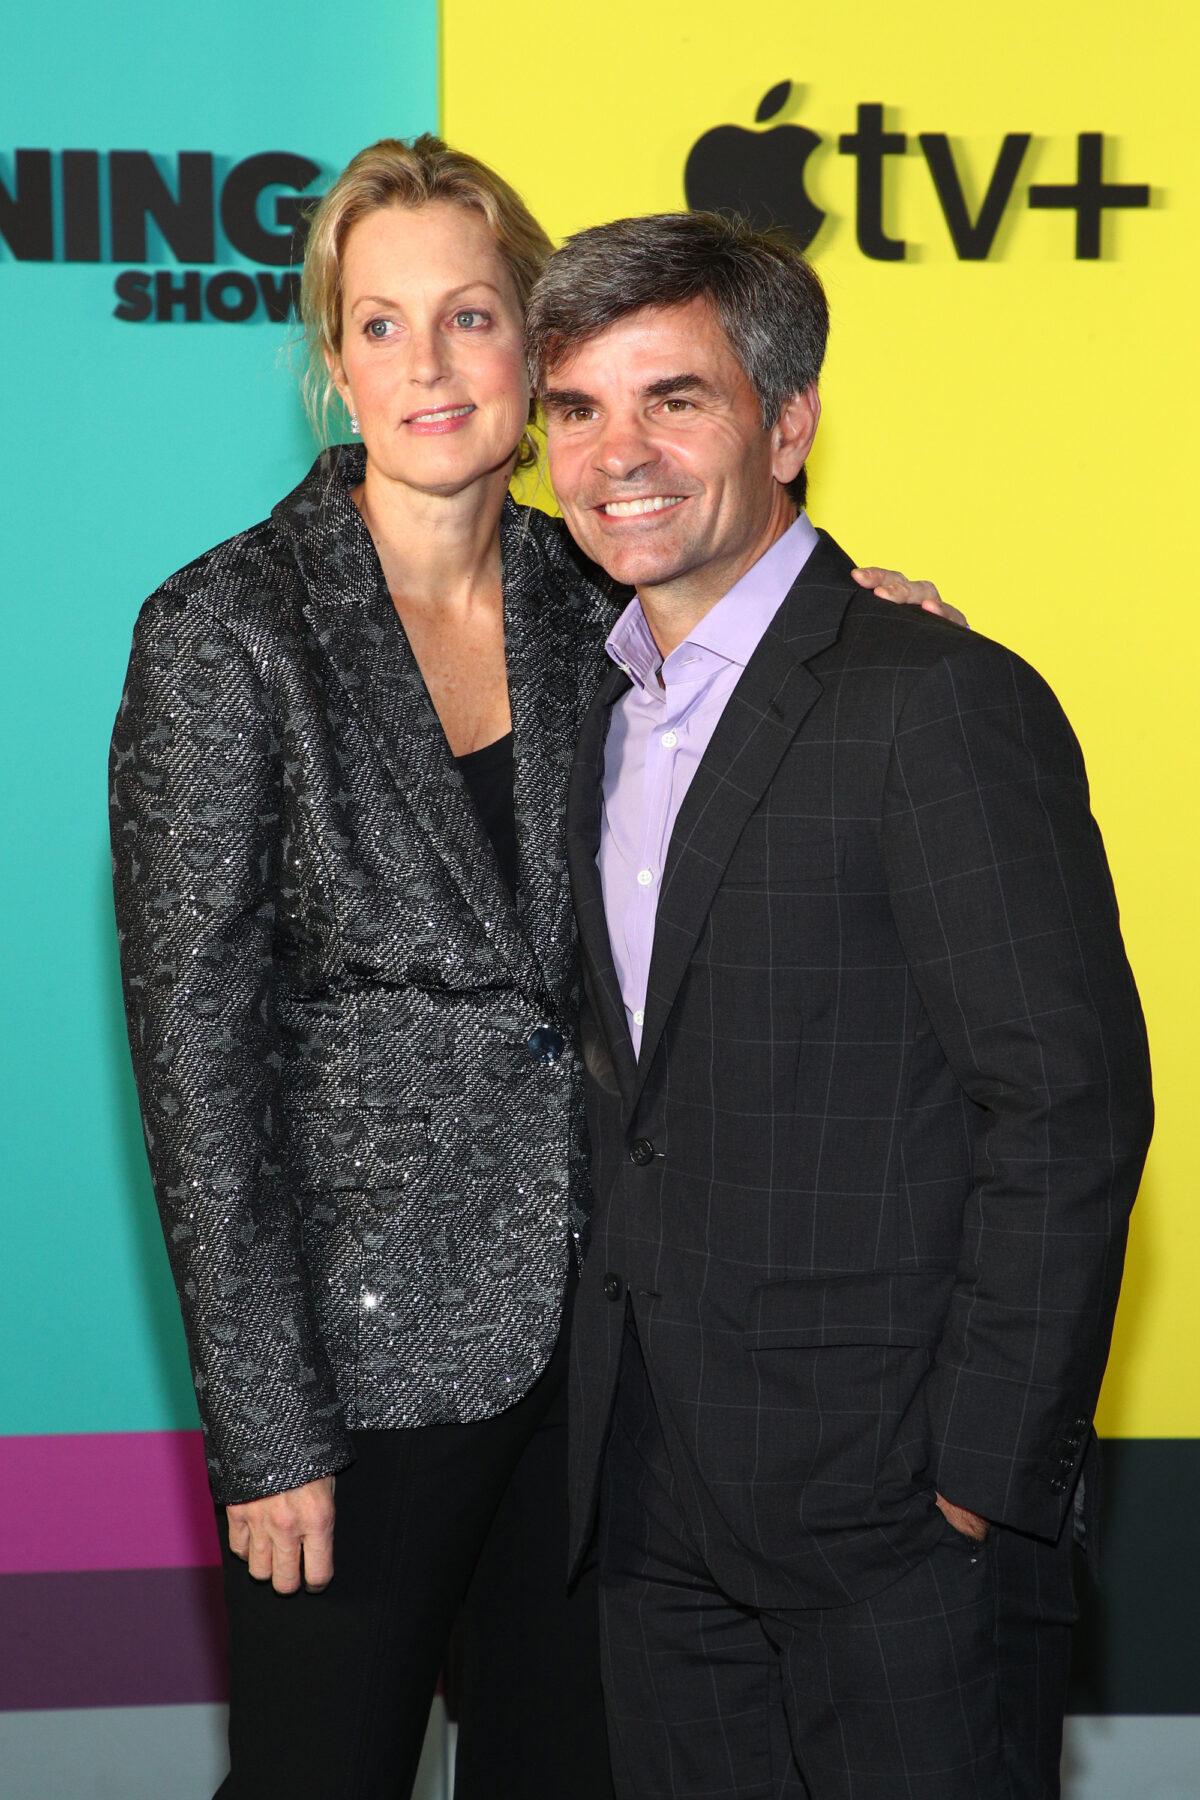 Ali Wentworth and George Stephanopoulos attend Apple TV+'s "The Morning Show" World Premiere at David Geffen Hall in New York City on Oct. 28, 2019. (Astrid Stawiarz/Getty Images)